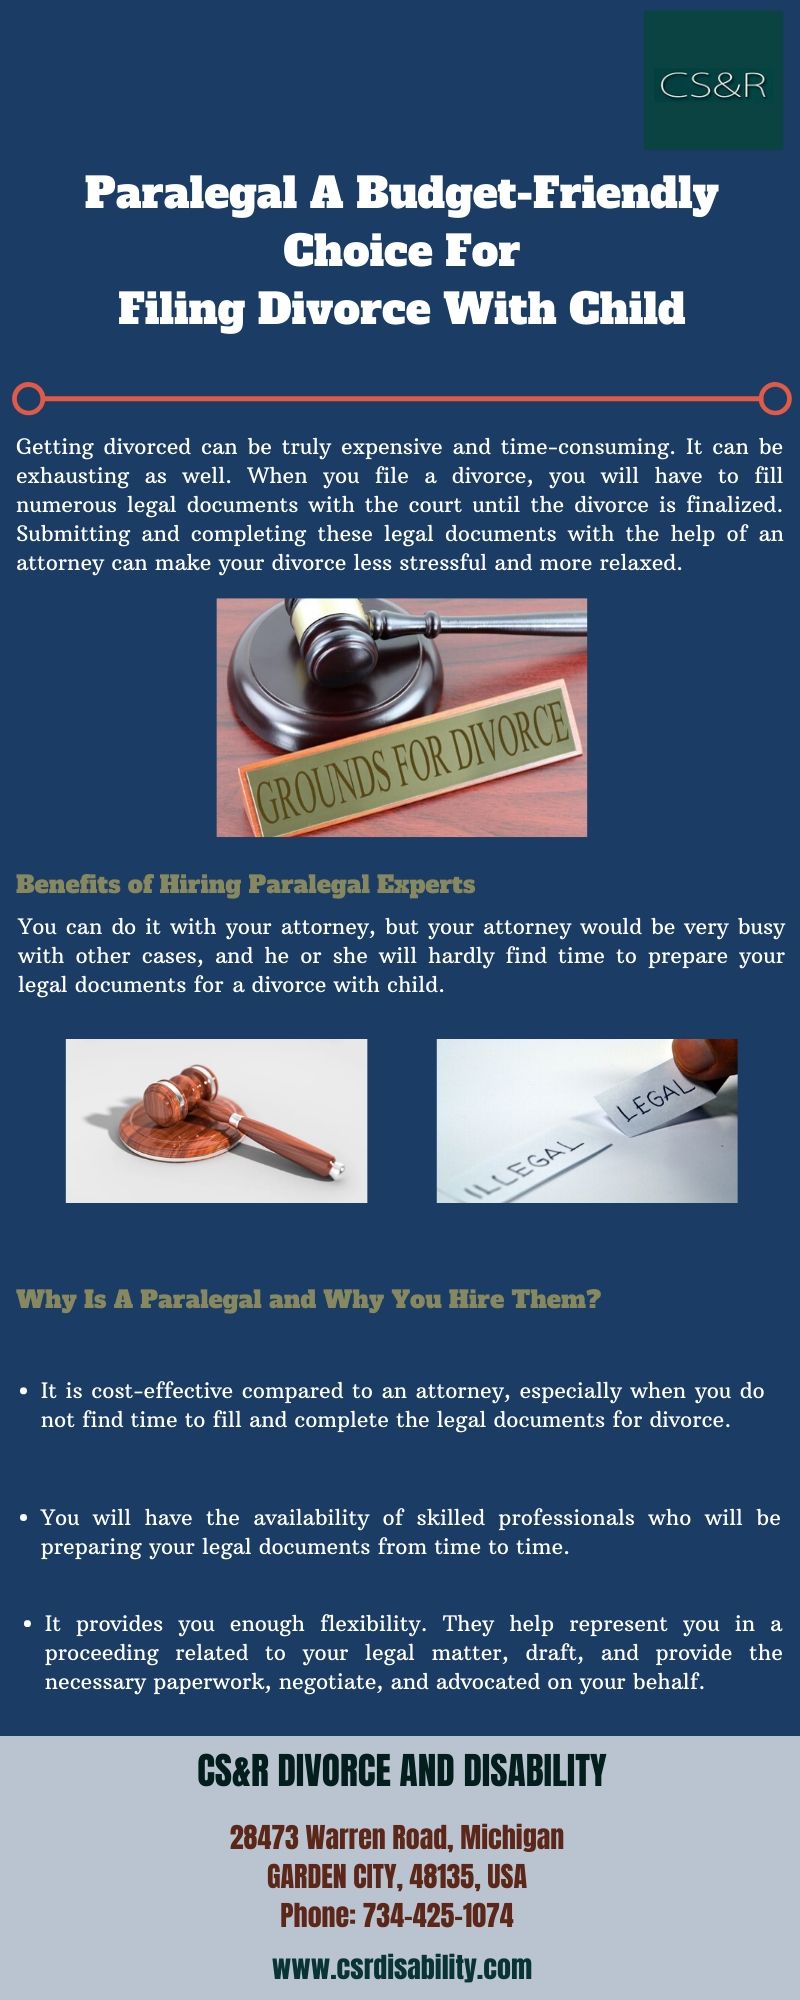 Paralegal A Budget-Friendly Choice For Filing Divorce With Child Many divorces are now resolved through the immediate process of legal documents to the court. Paralegals serve a valuable role as document prepares and guardians in various cases. For more details, visit: https://bit.ly/3abgdeR by csrdisability